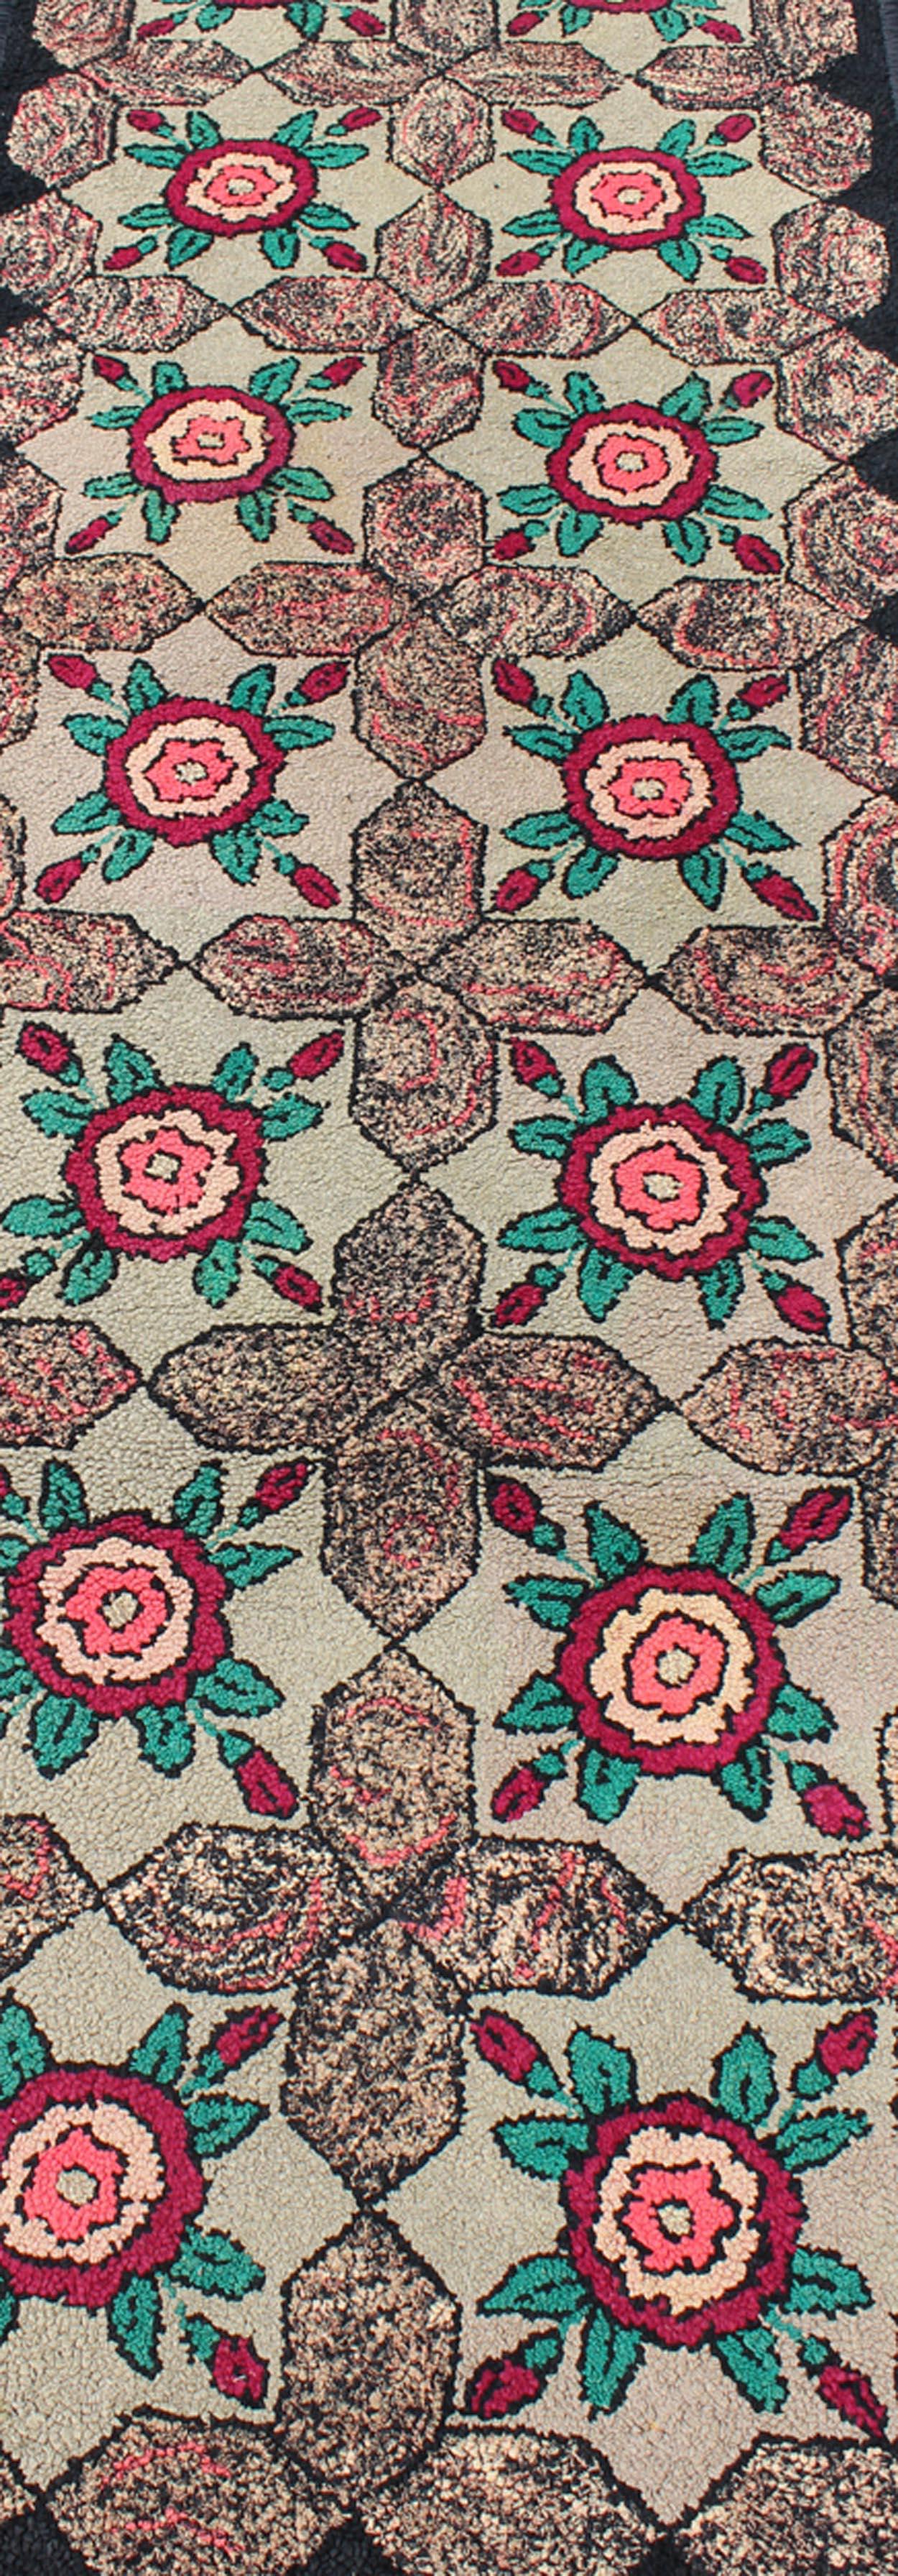 Hand-Knotted Repeating Floral-Leaf Design American Hooked Rug in Brown, Green, and Red For Sale